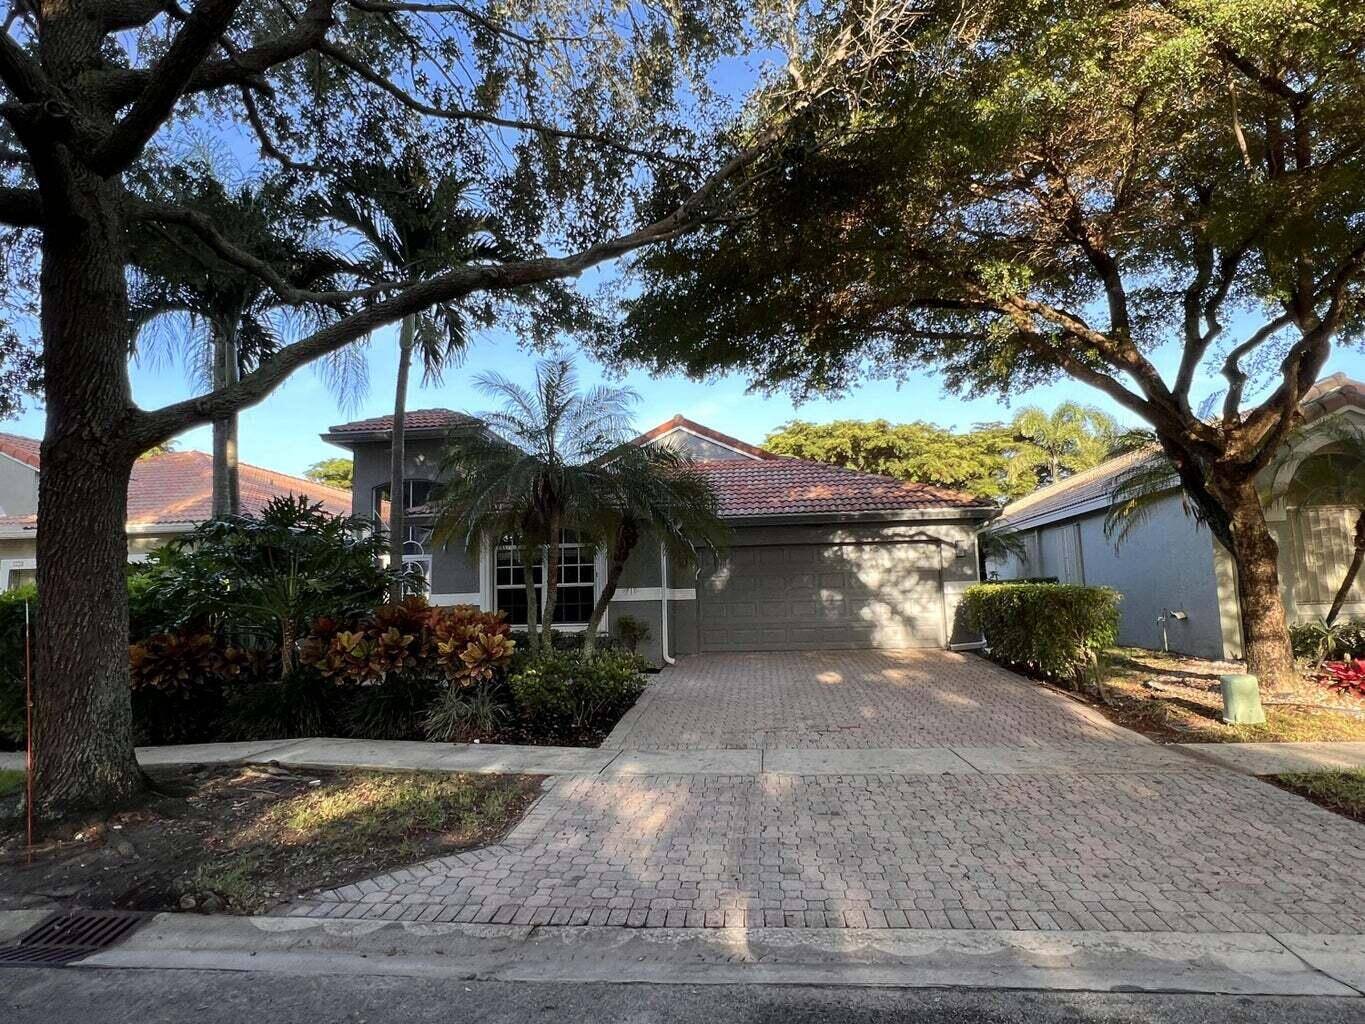 Beautiful community with tree lined streets, Location and the epitome of South Florida Living.